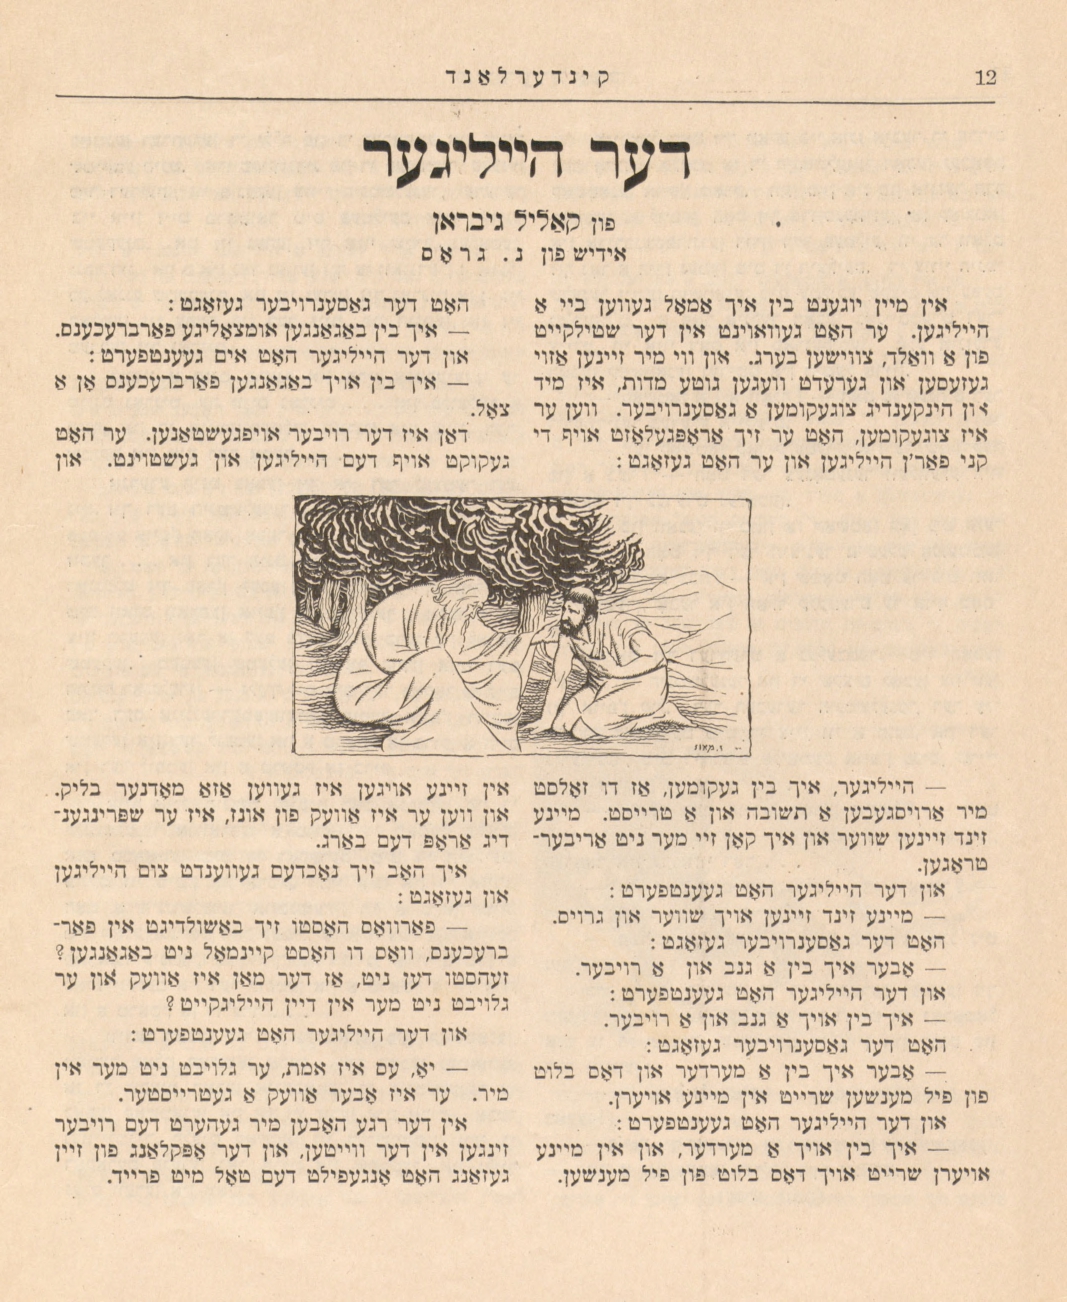 The Holy Man by Kahlil Gibran, translated into Yiddish by Naftali Gross, Kinderland, Vol. 1, No. 3, March, 1921, p. 12.